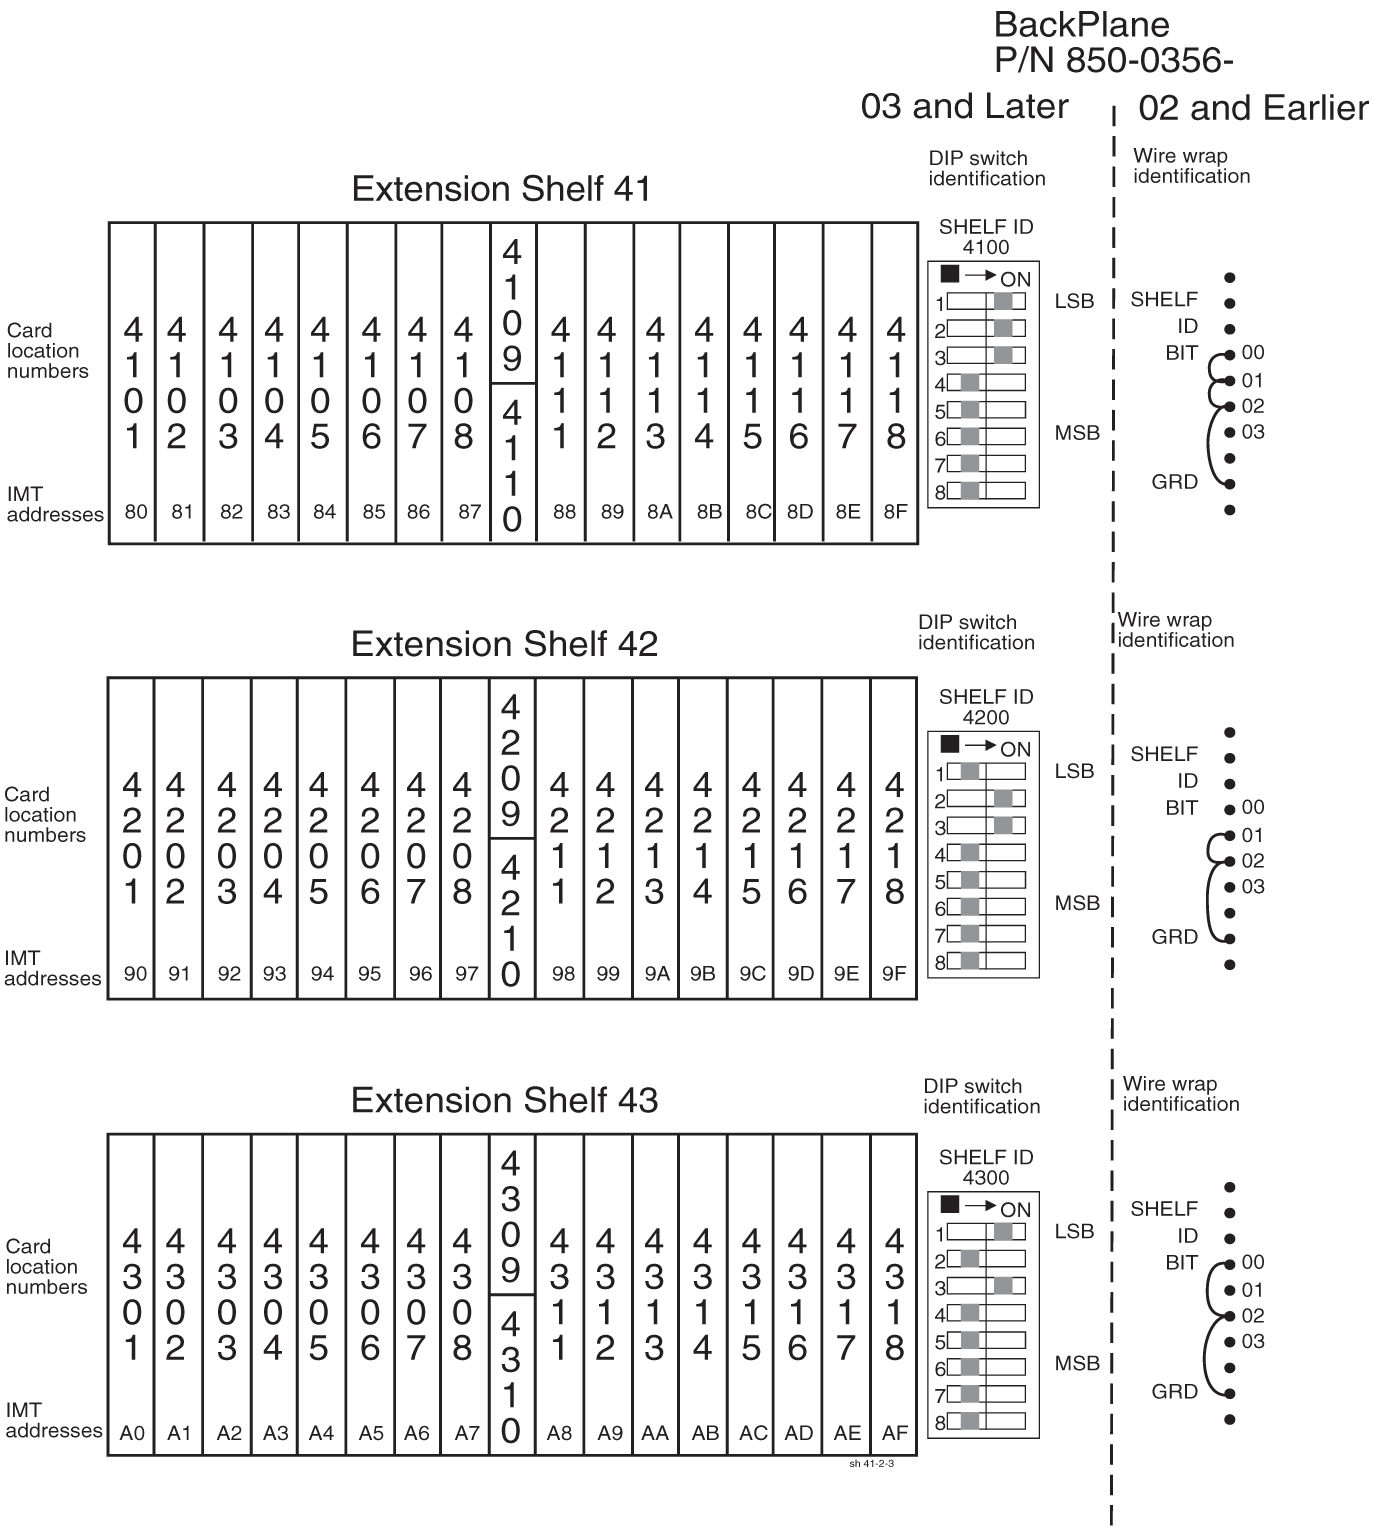 img/r_card_locations_in_control_and_extension_shelves_im-fig4.jpg